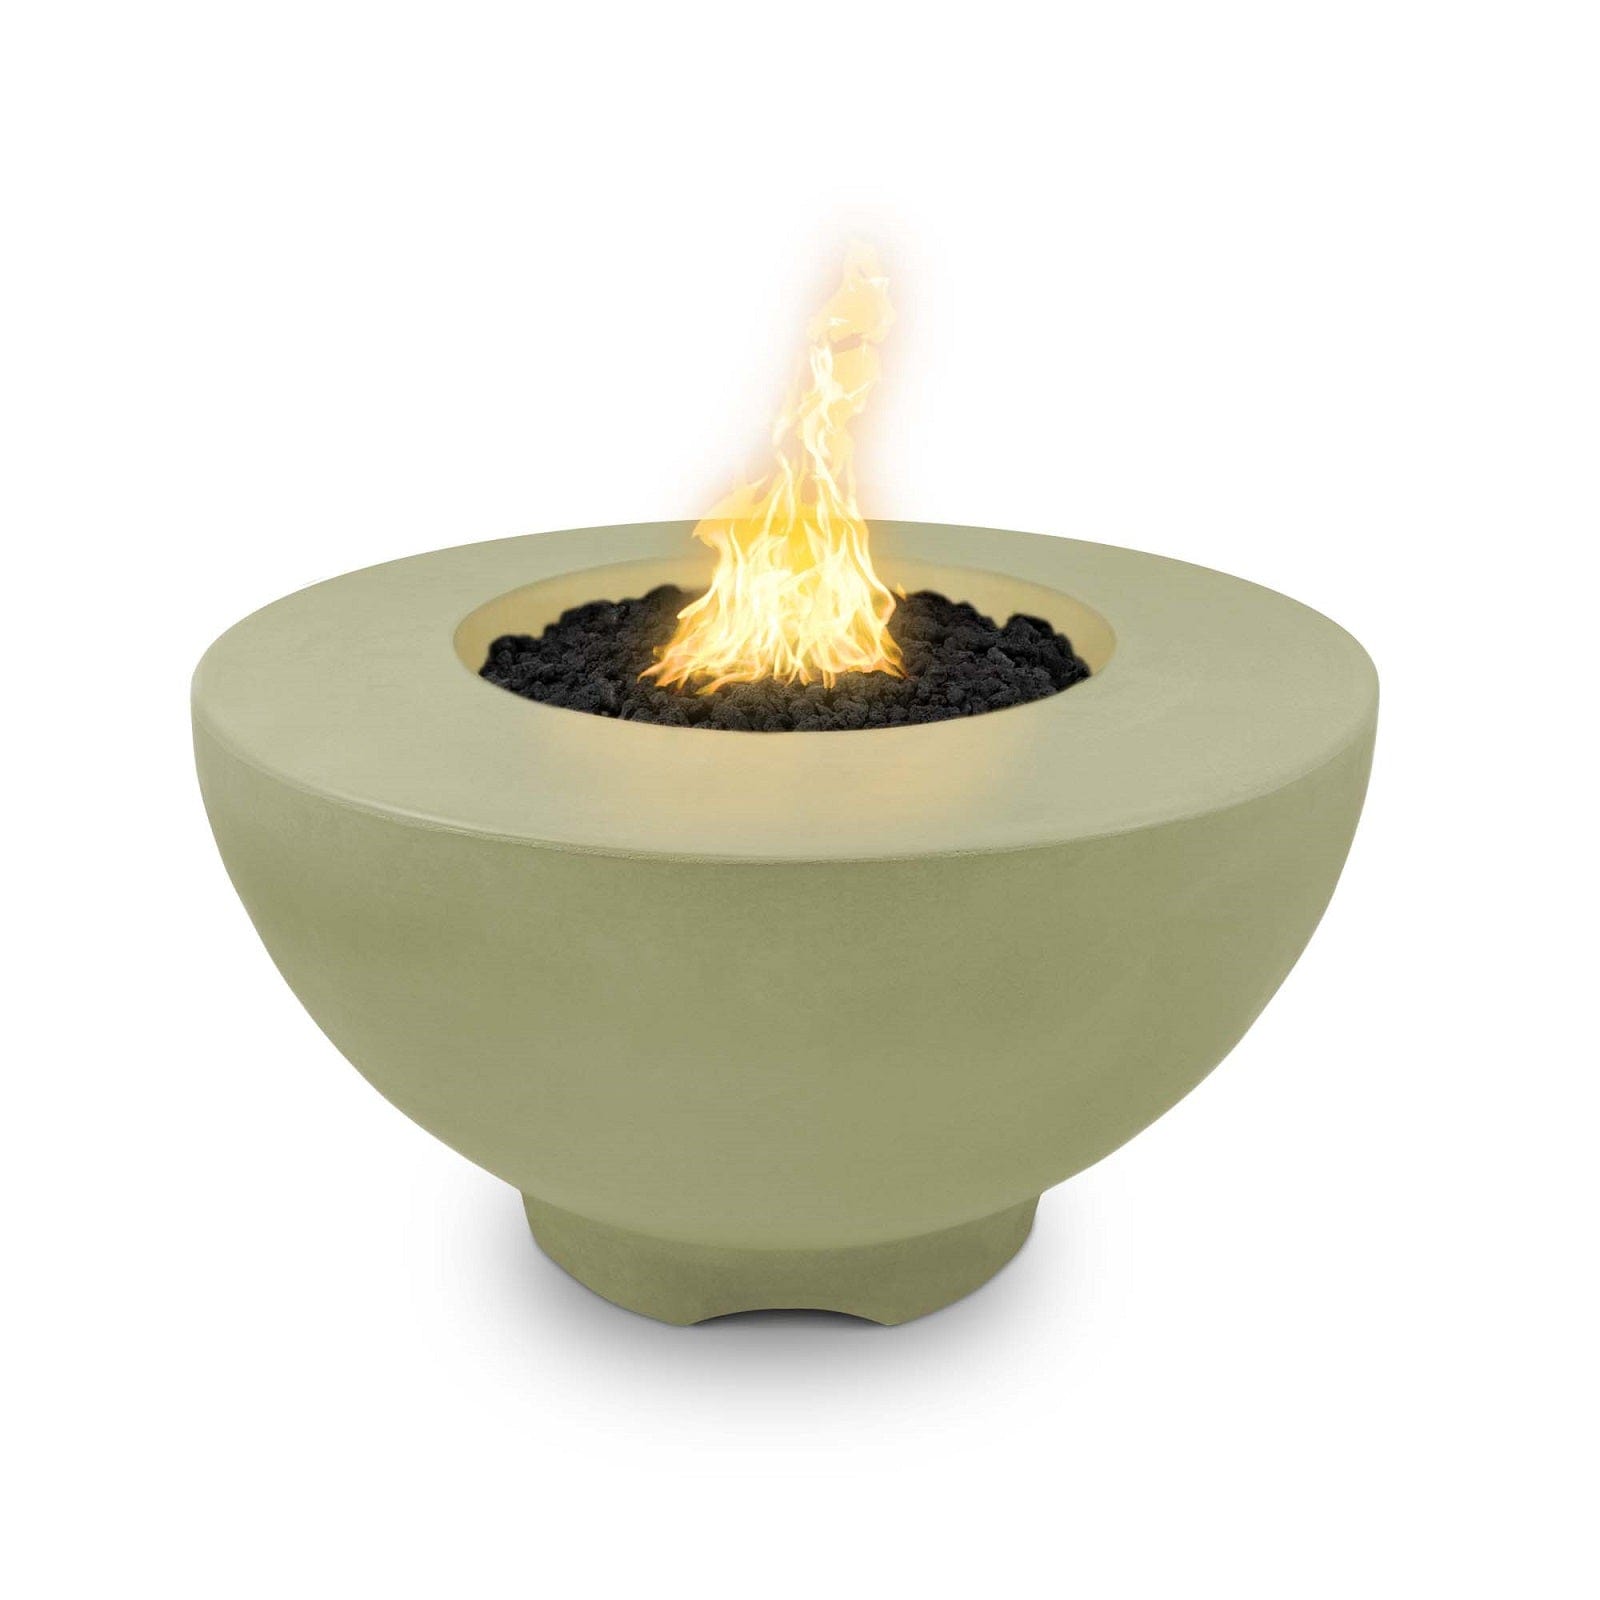 The Outdoor Plus Fire Features Ash (-ASH) / Match Lit Ignition / Liquid Propane The Outdoor Plus 37" Round Sienna Fire Pit in Solid Concrete Finishes / OPT-RF37, OPT-RF37FSML, OPT-RF37FSEN, OPT-RF37E12V, OPT-RF37EKIT